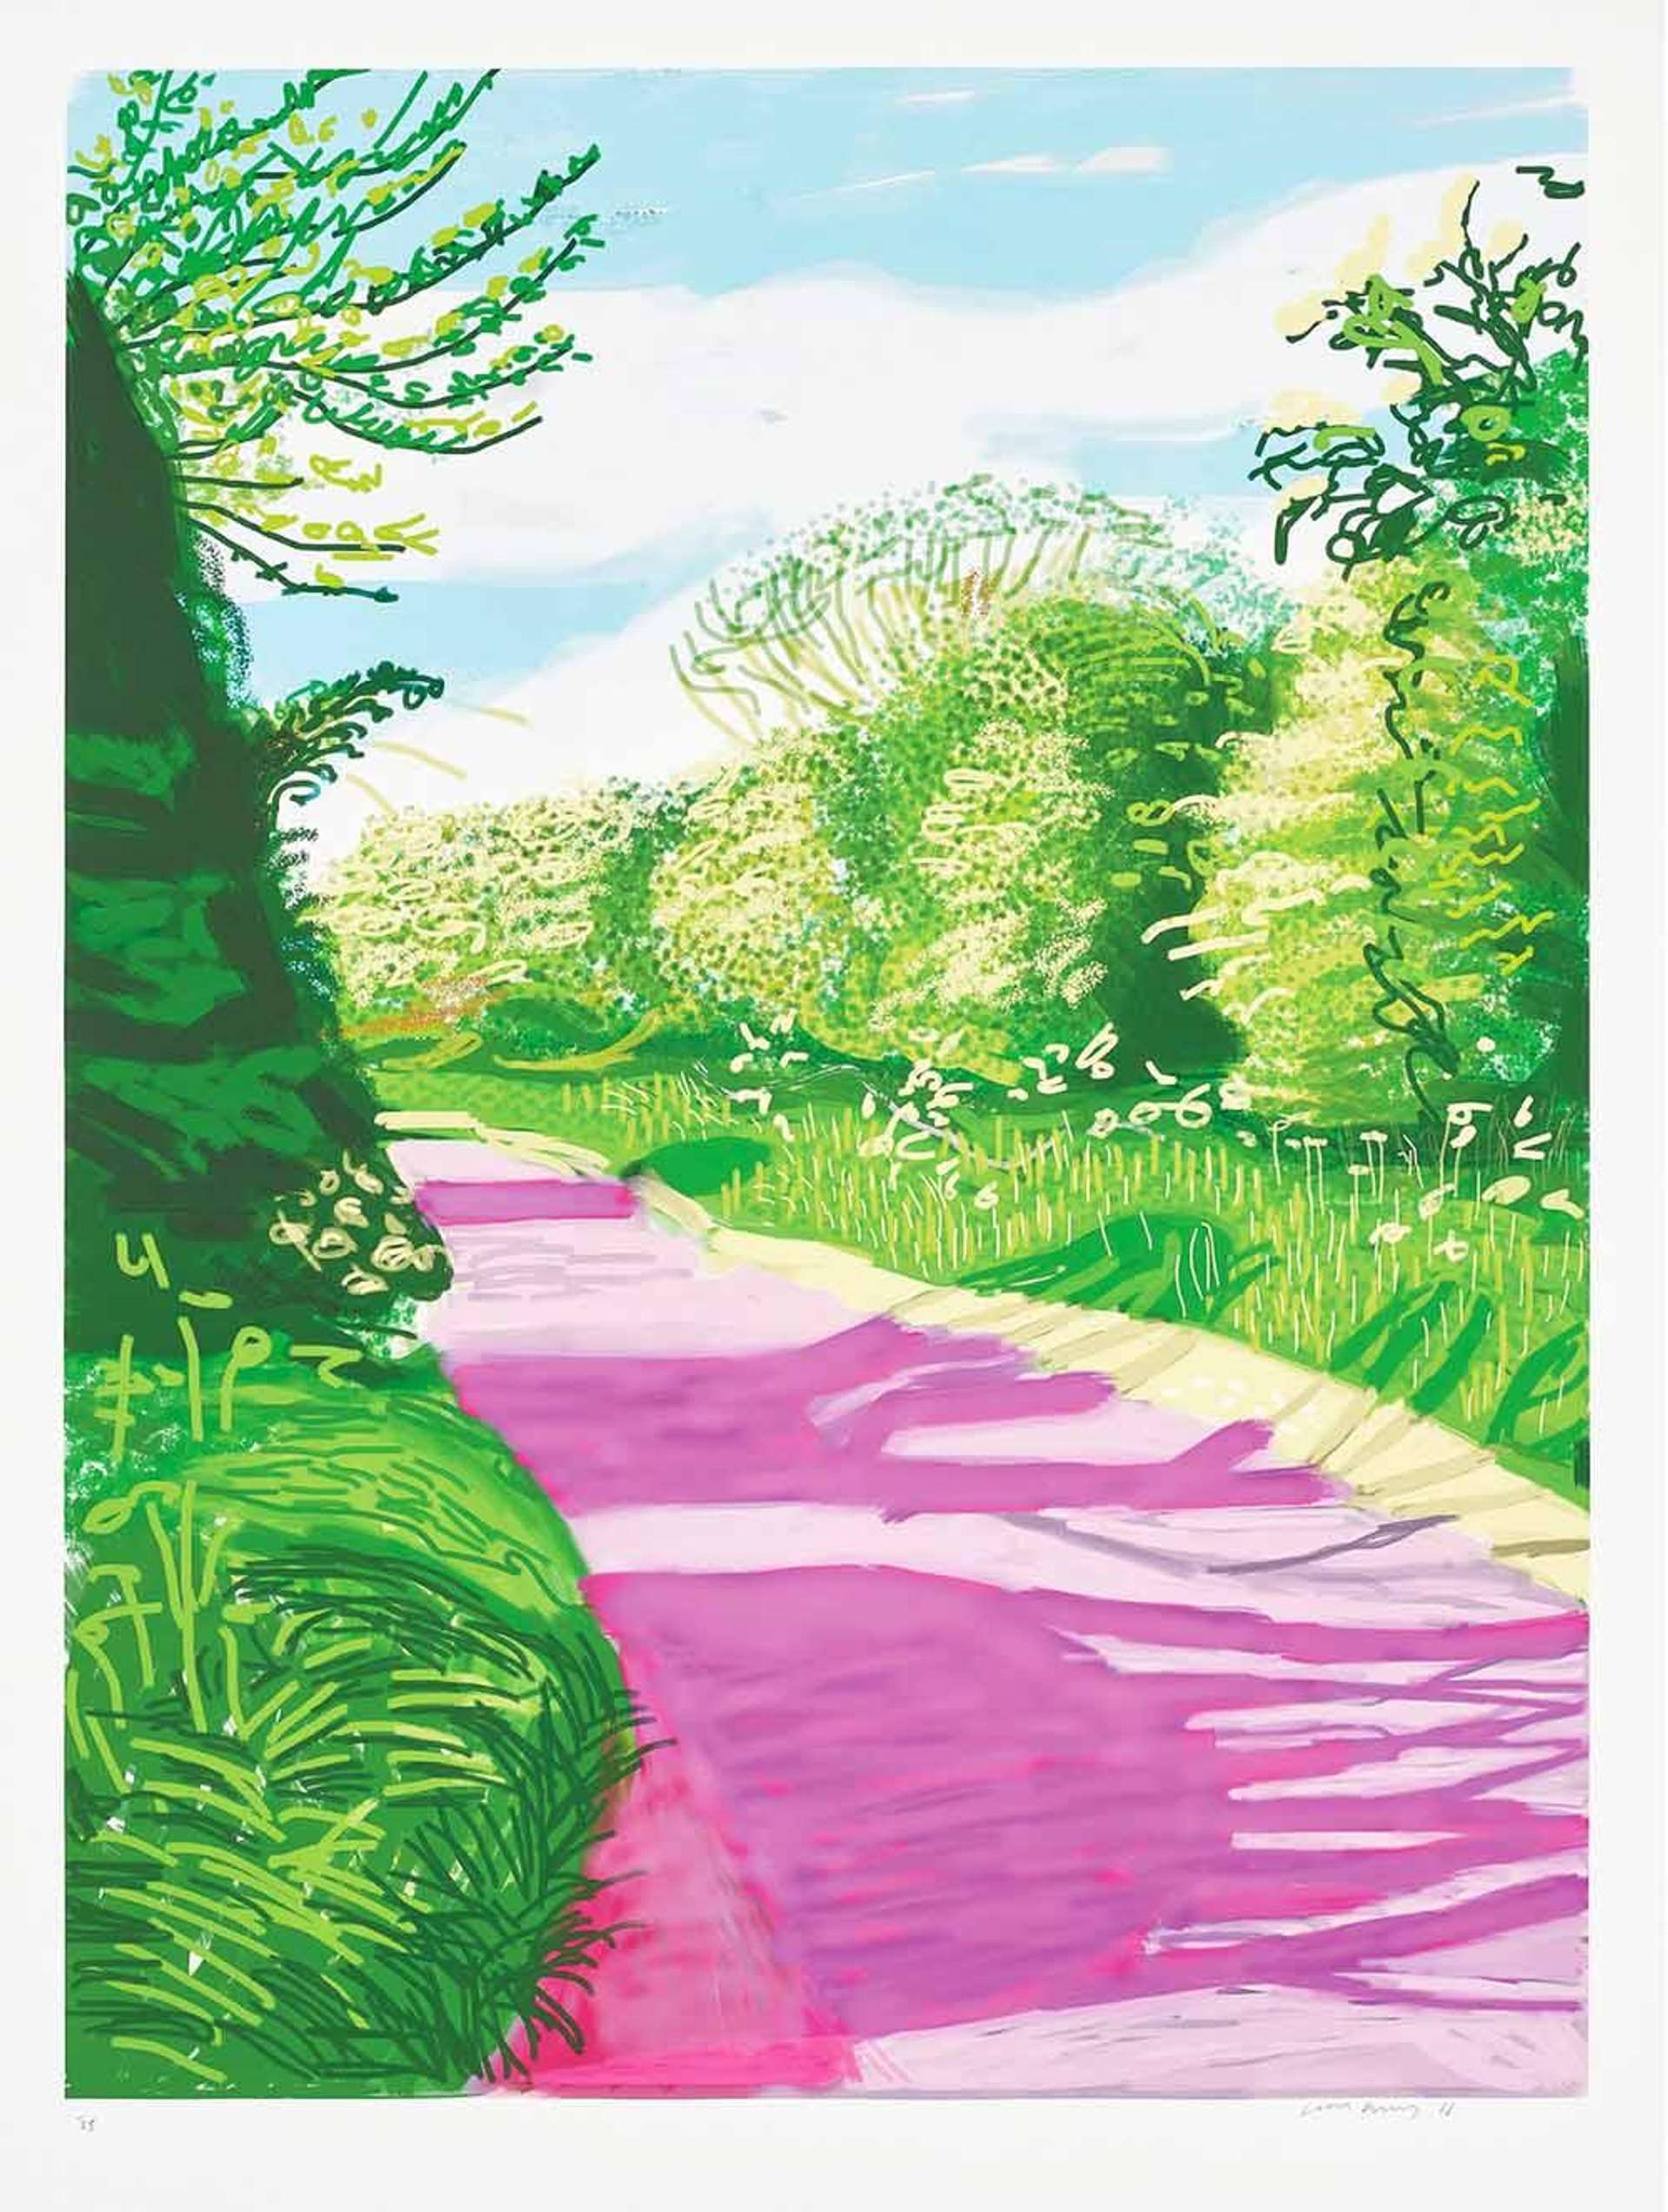 The Arrival Of Spring In Woldgate East Yorkshire 31st May 2011 - No. 2 - Signed Print by David Hockney 2011 - MyArtBroker